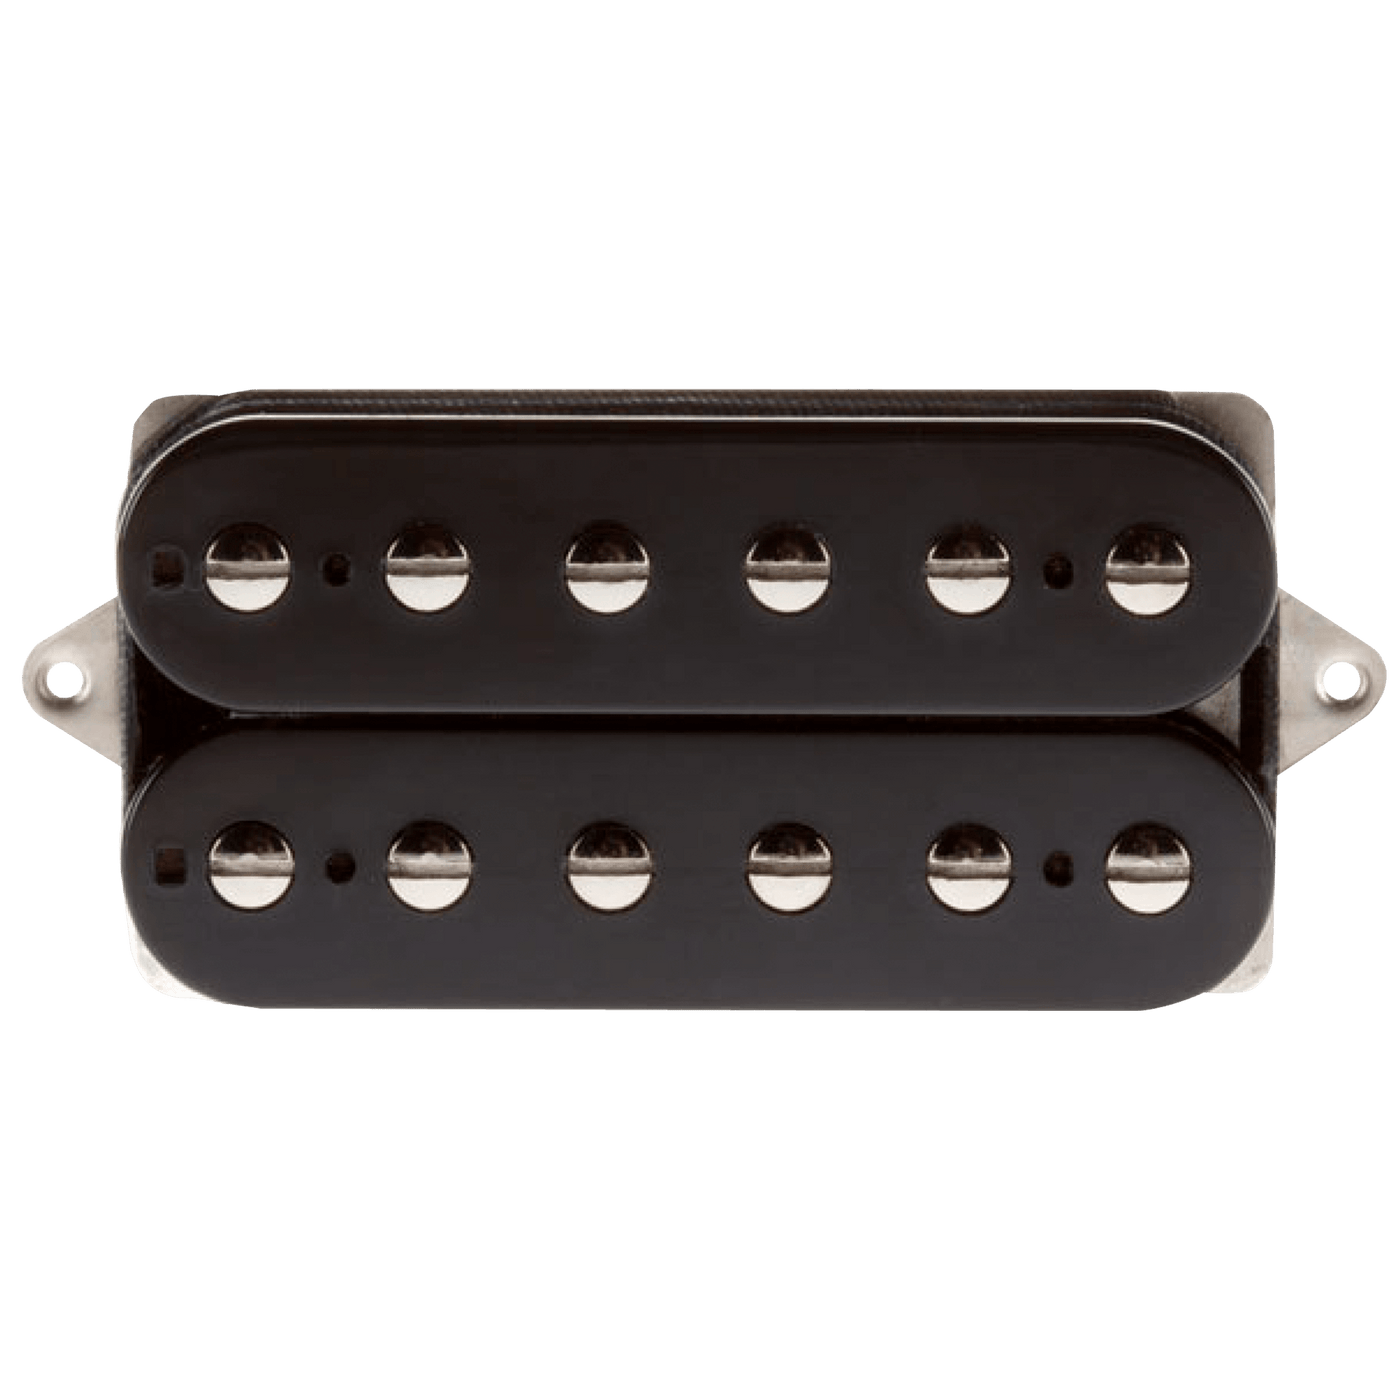 Suhr SSV Humbucker Black (Neck) - $149990 - Gearhub - “We are happy to introduce the new Thornbucker + bridge pickup. It retains all the clarity, warmth, character, and mojo of the original Thornbuckers, and adds a bit more power and oomph. Great for players that like a slightly overwound PAF-type tone!”. “We’re overjoyed with the enthusiasm from players for the Thornbucker humbucking pickups! The pickups have been a resounding success, garnering praise for their extraordinary tone and balance. I’m truly ho